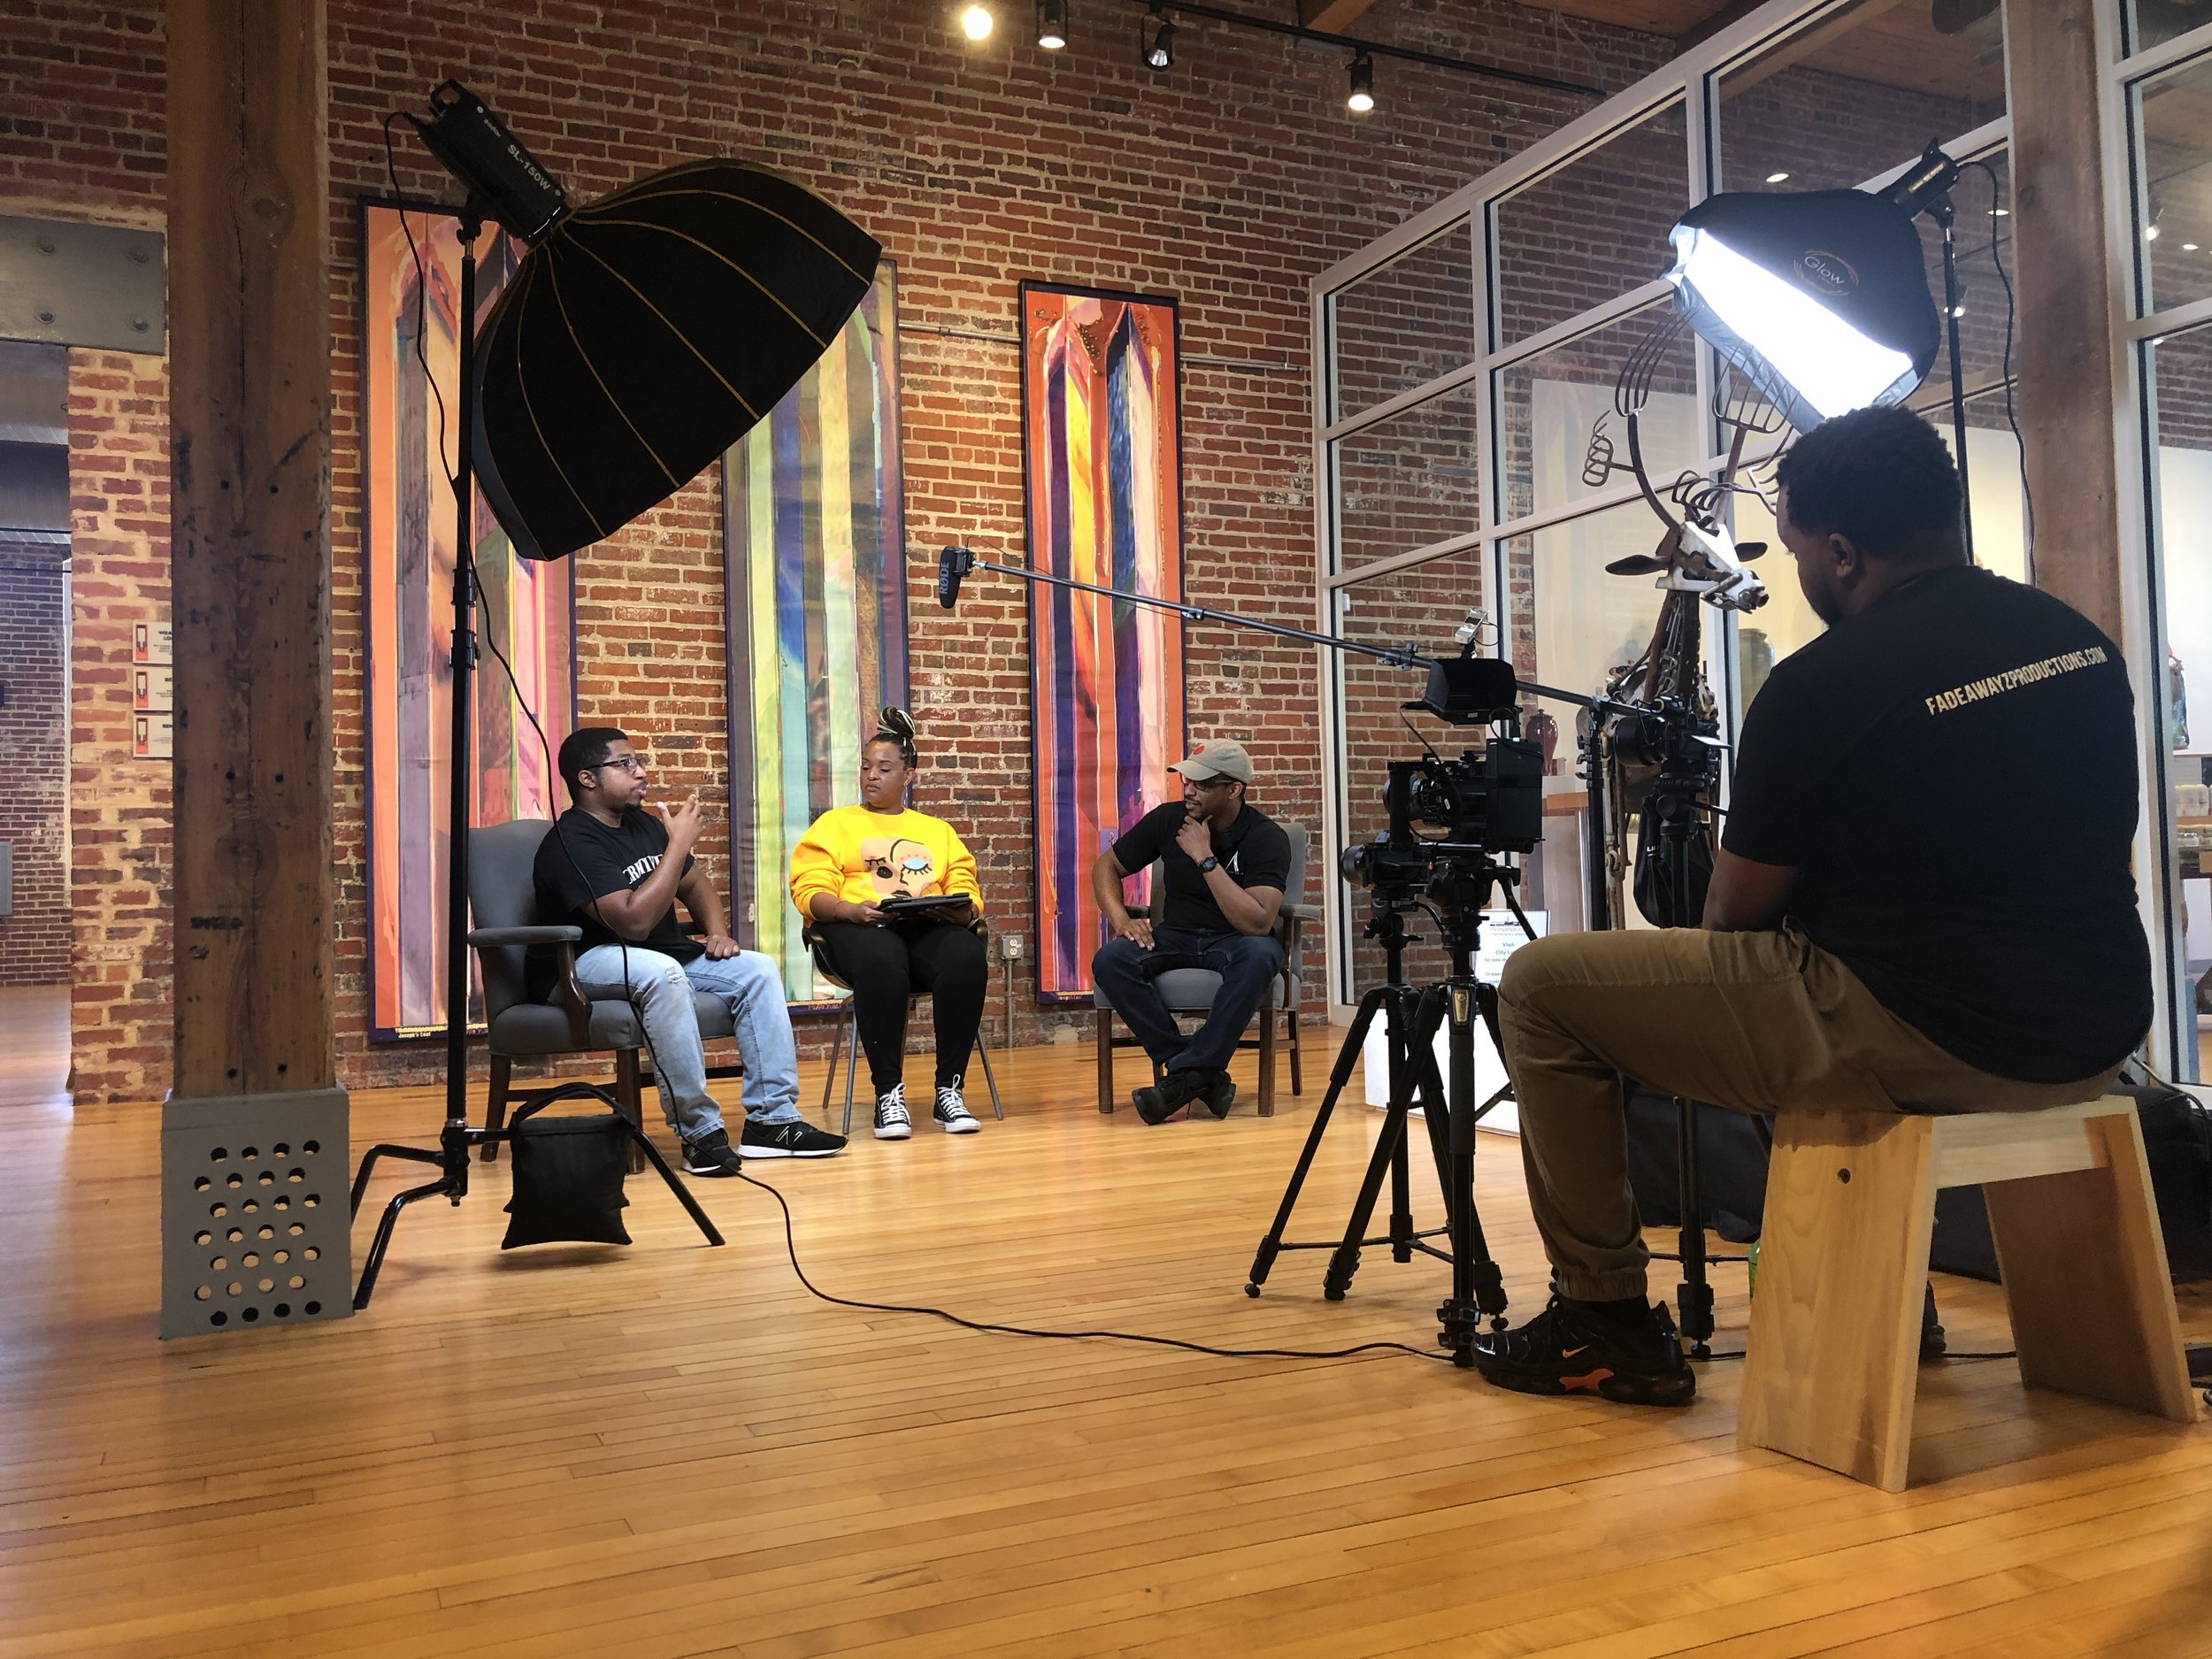  Filming is underway for the “Meet the Artists” episode.  Photo courtesy of Alicyn Wiedrich  